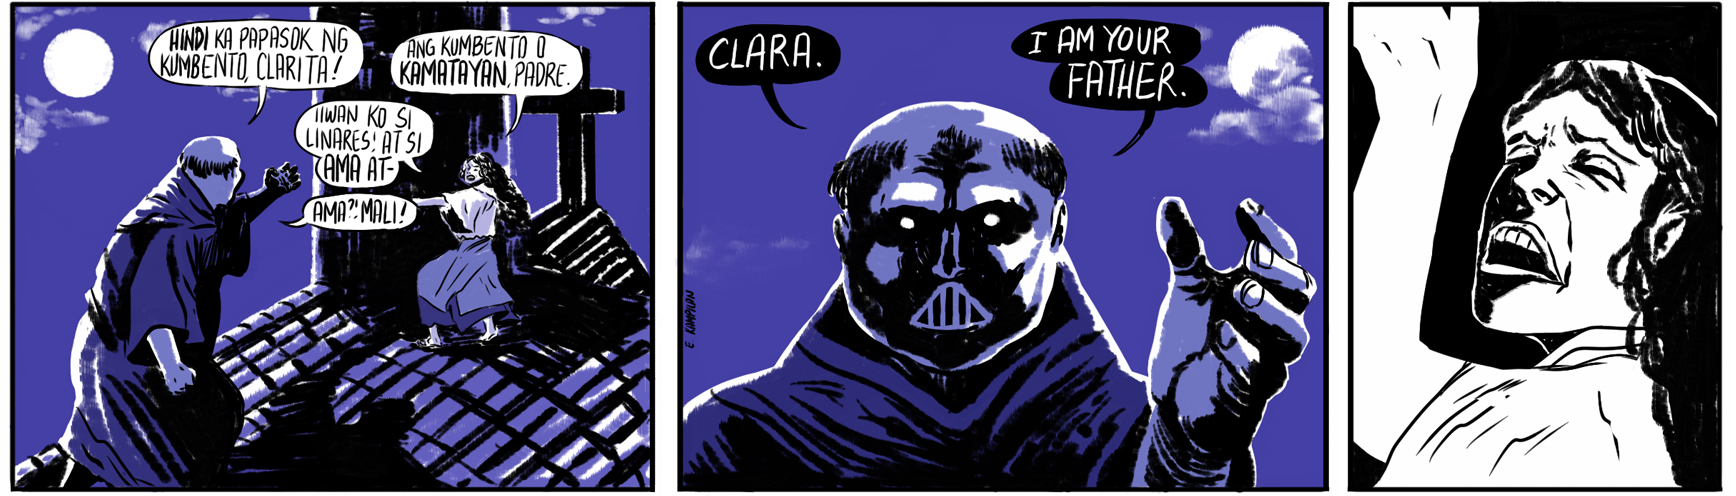 Clara, Join the dark side of the force